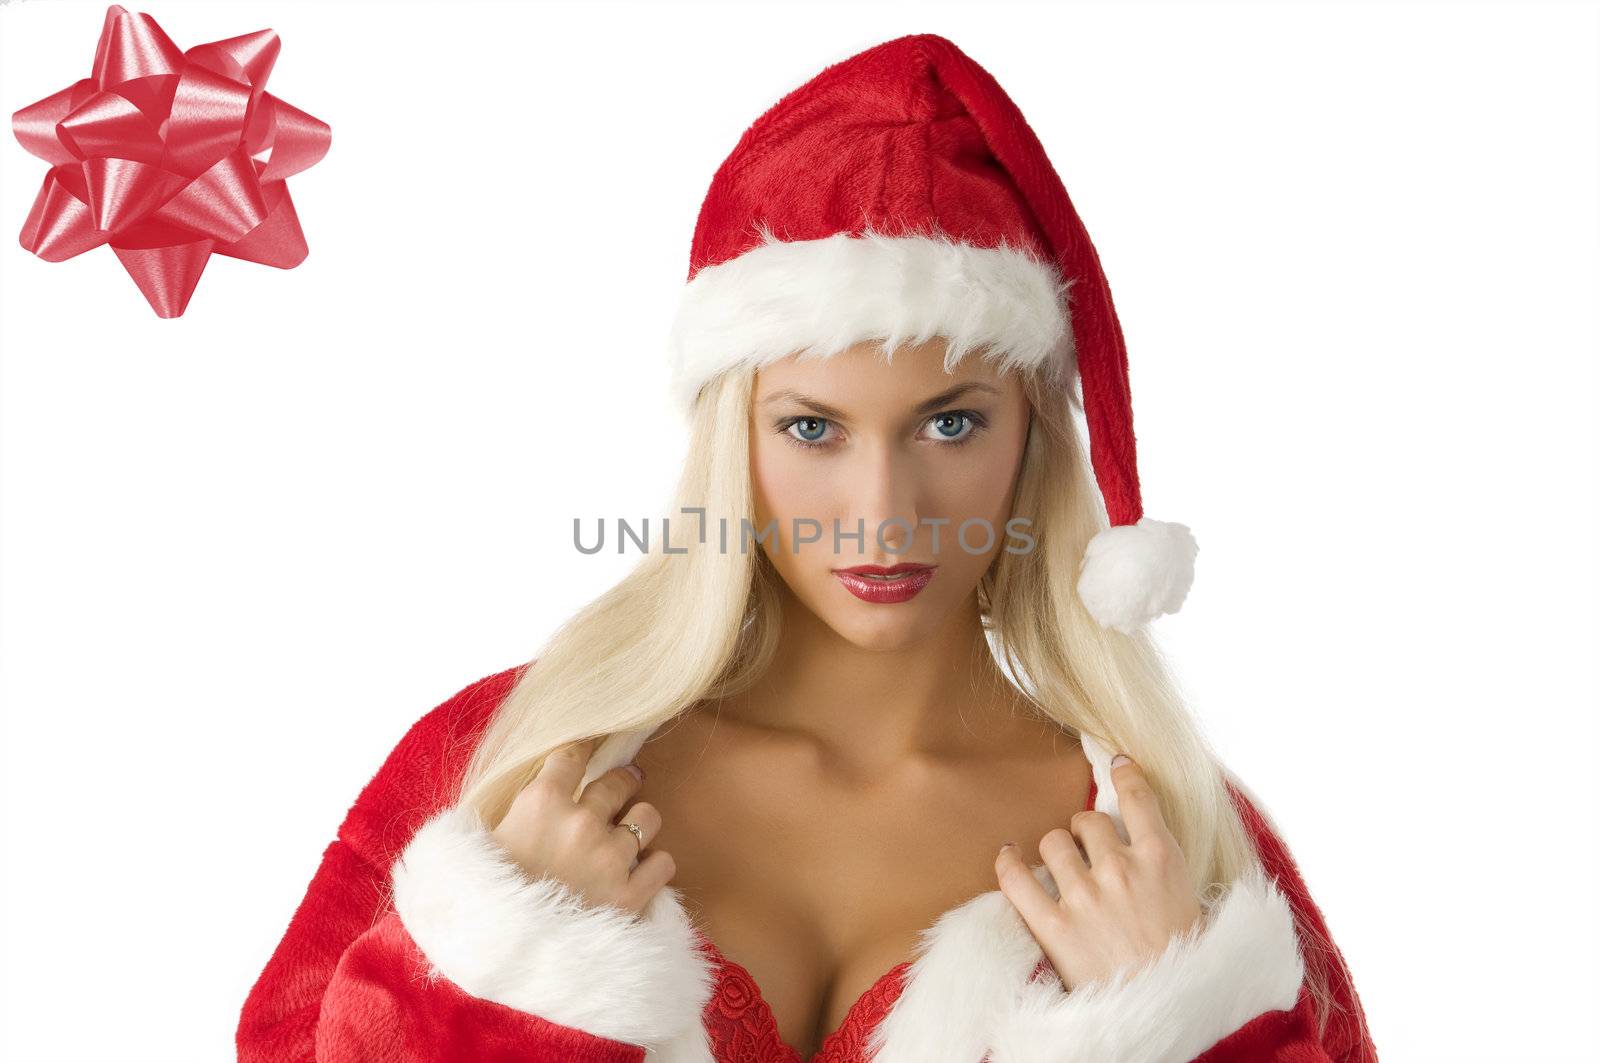 sensual and cute blond girl with in santa claus dress showing her red bra